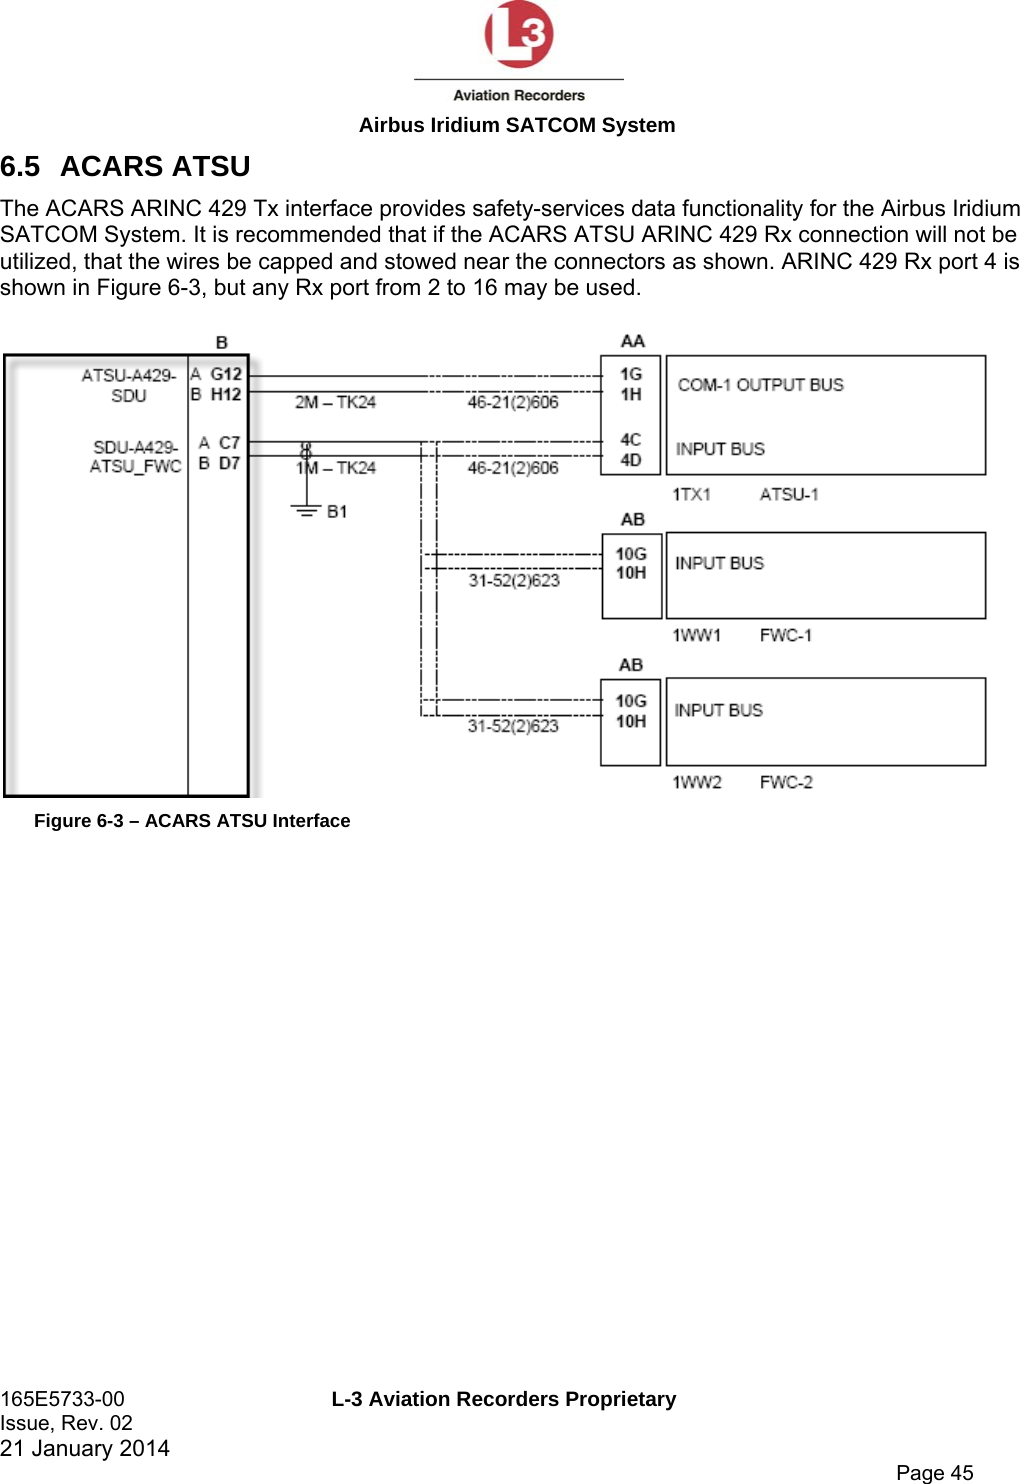  Airbus Iridium SATCOM System 165E5733-00  L-3 Aviation Recorders Proprietary Issue, Rev. 02   21 January 2014      Page 45 6.5 ACARS ATSU The ACARS ARINC 429 Tx interface provides safety-services data functionality for the Airbus Iridium SATCOM System. It is recommended that if the ACARS ATSU ARINC 429 Rx connection will not be utilized, that the wires be capped and stowed near the connectors as shown. ARINC 429 Rx port 4 is shown in Figure 6-3, but any Rx port from 2 to 16 may be used.   Figure 6-3 – ACARS ATSU Interface  